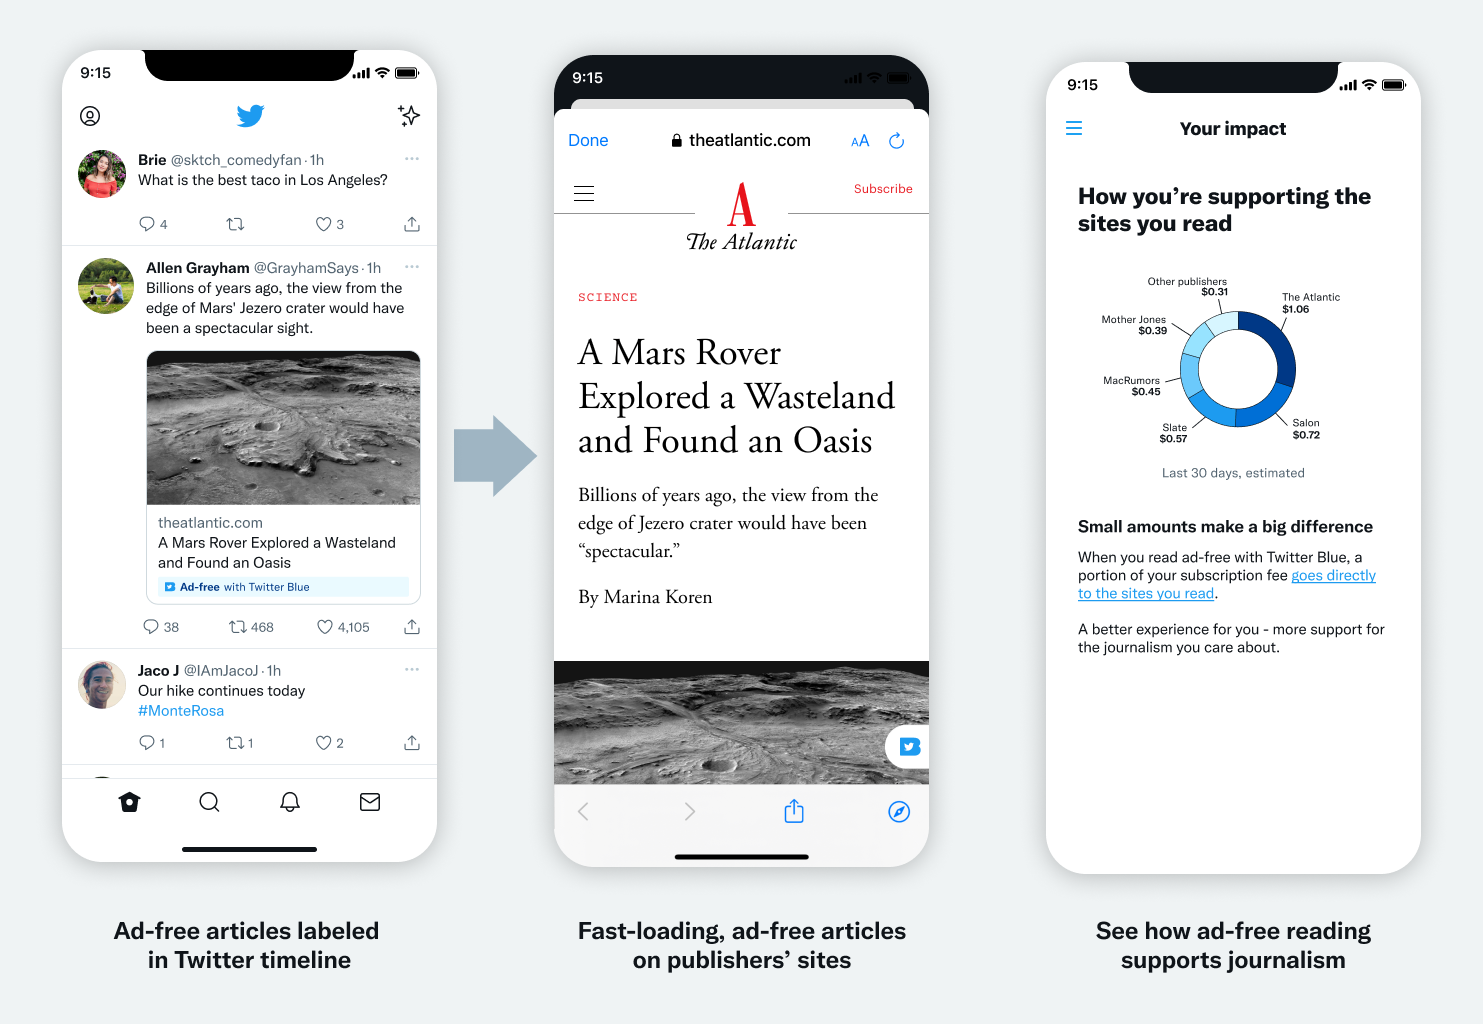 Twitter Ad-free Articles screens